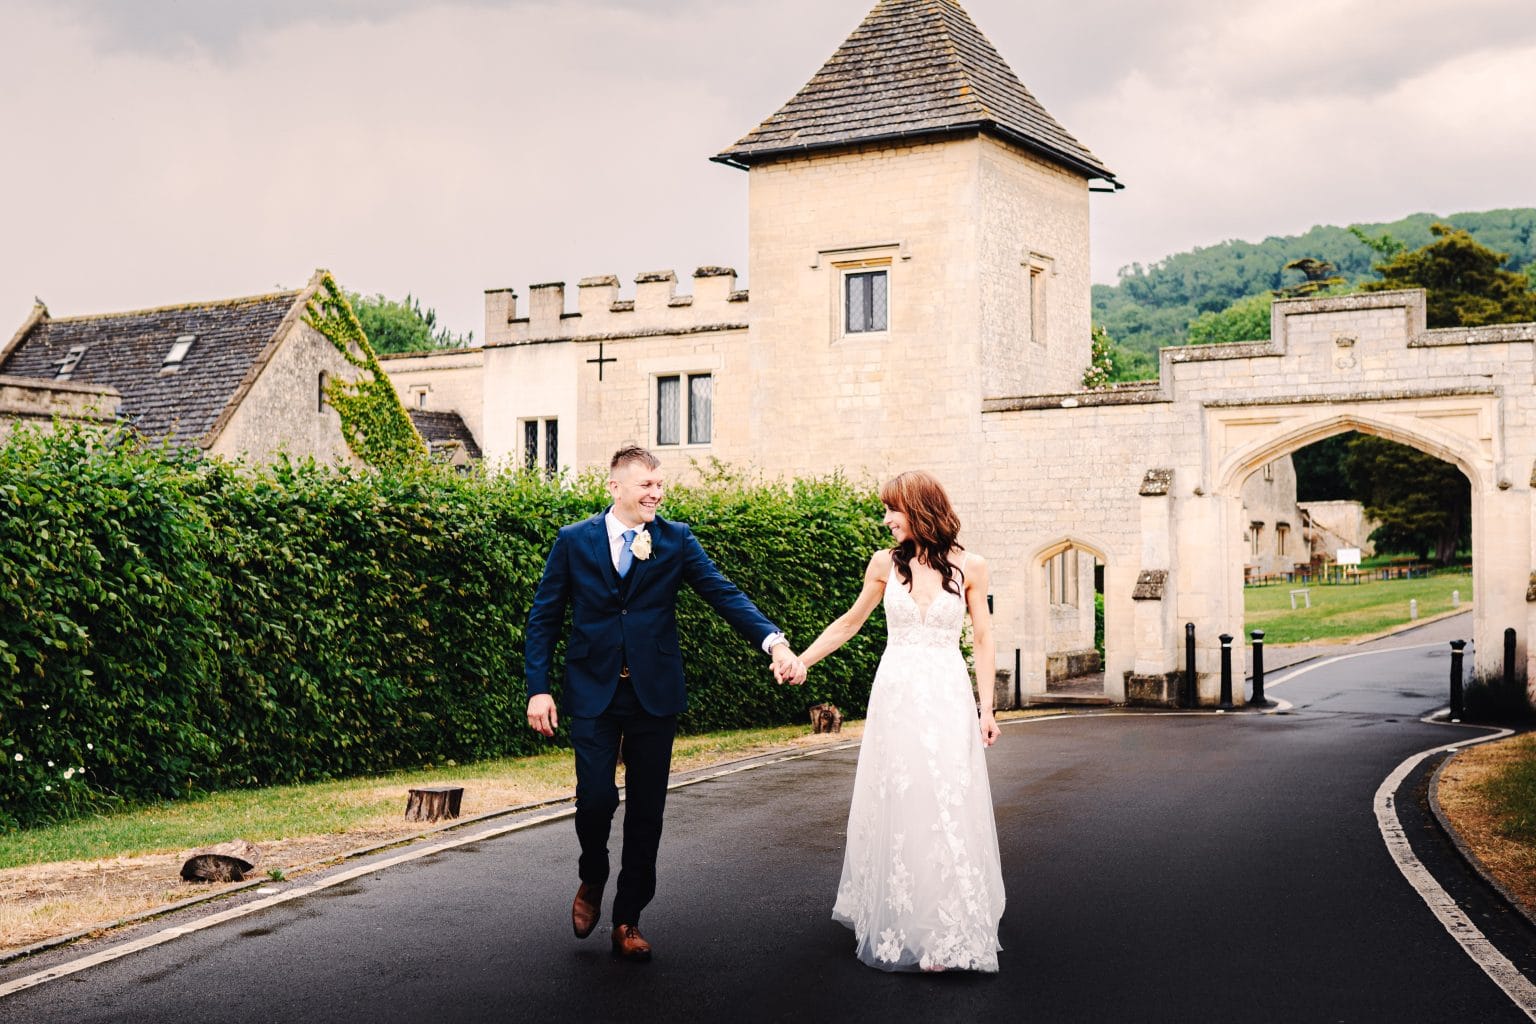 Wedding photographer Ellenborough Park Hotel captures this married couple walking hand in hand in this summertime wedding.